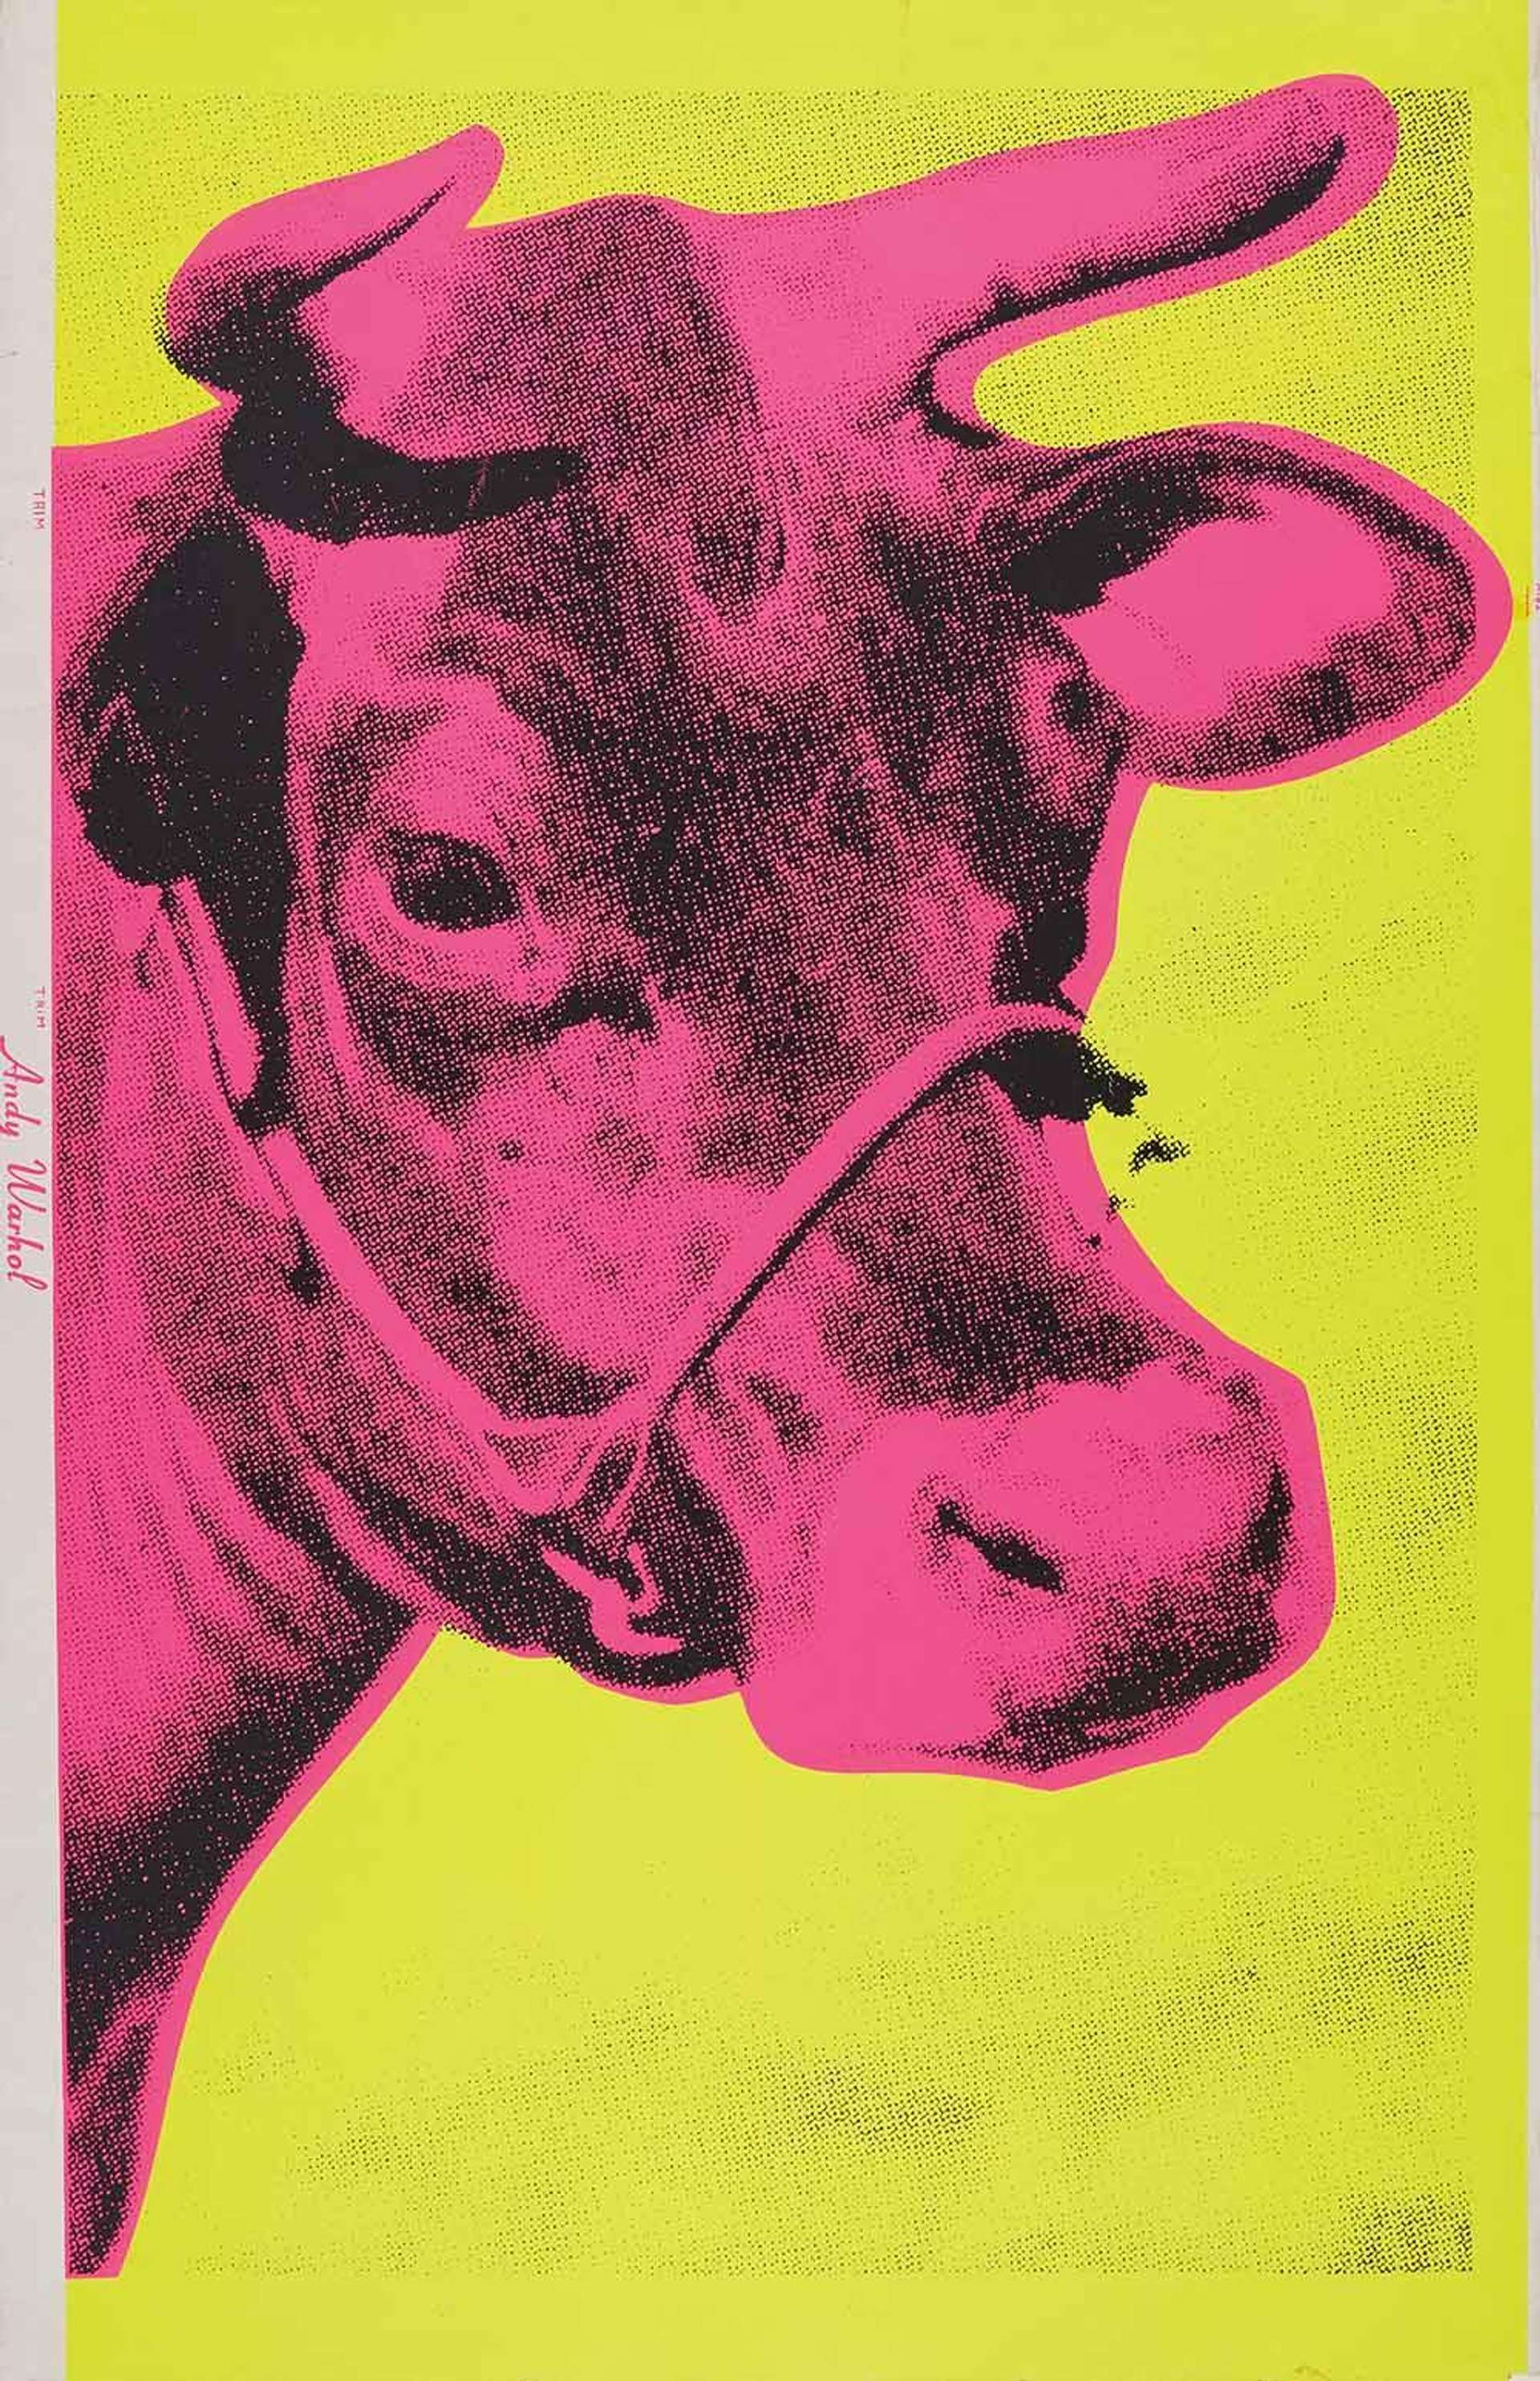 10 Facts About Andy Warhol's Cow